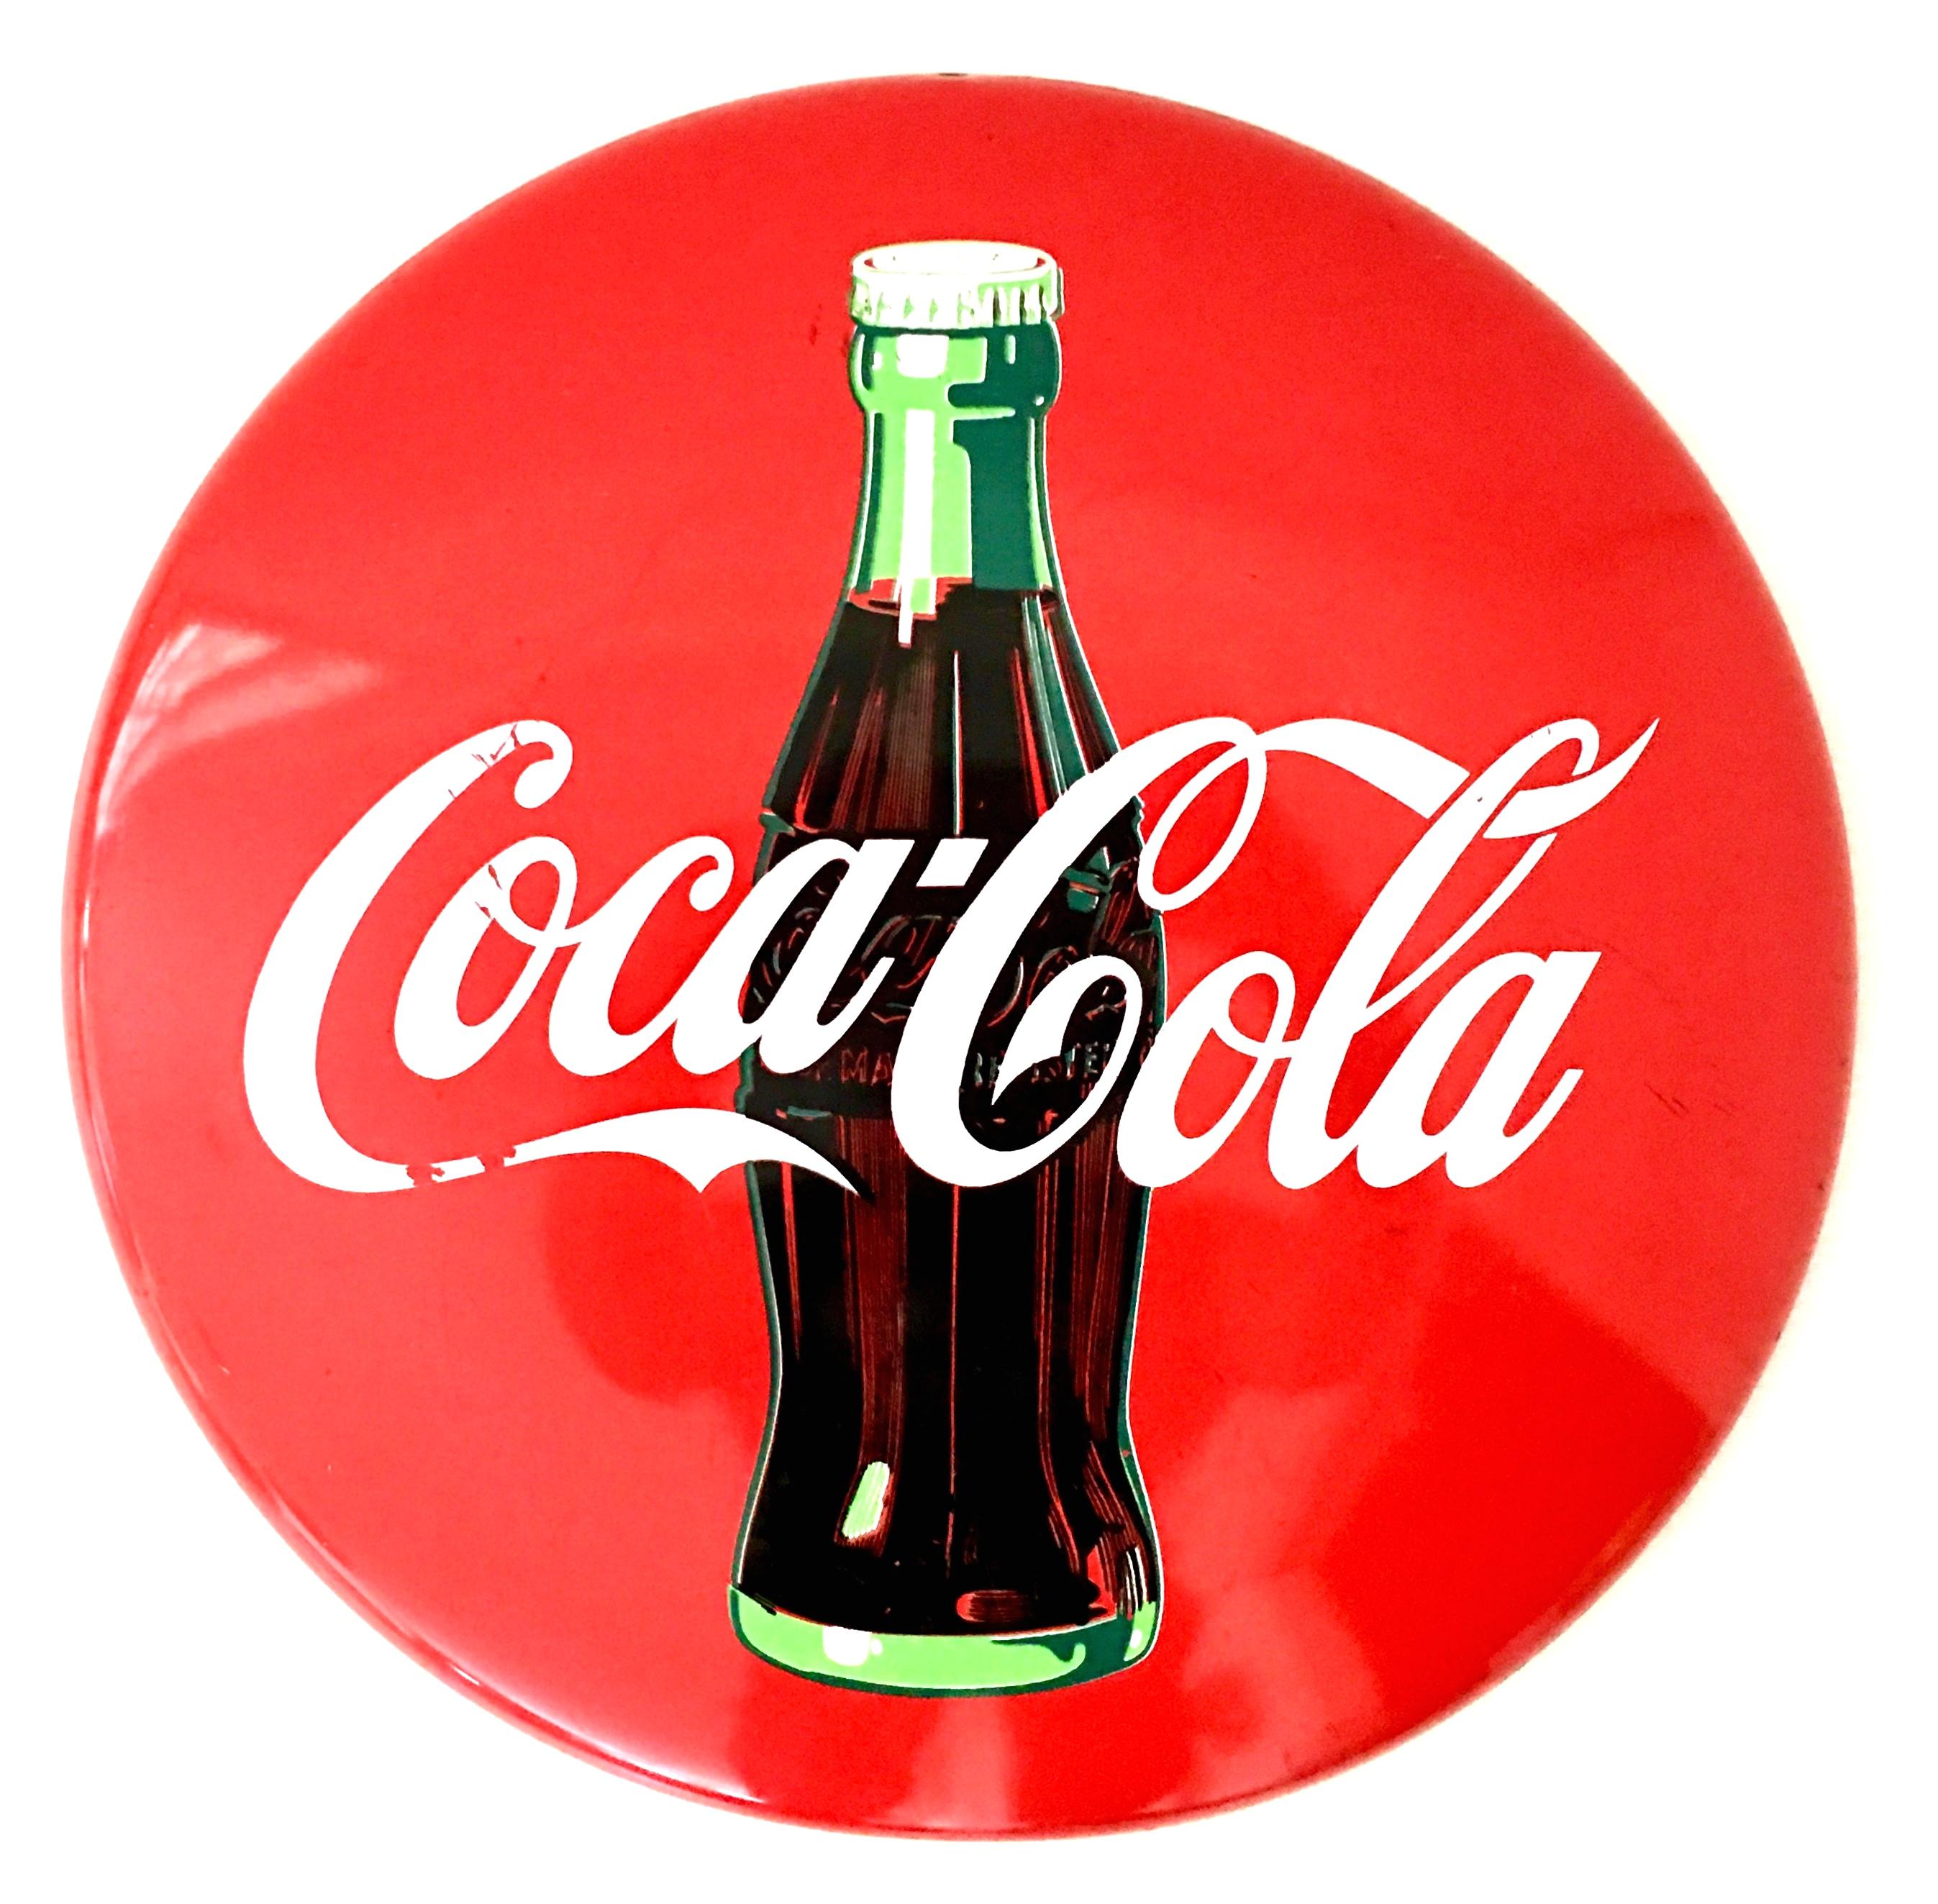 1992 Coca-Cola enamel on iron round disc red button and bottle advertising sign.
Signed on the lower front, 1992 The Coca-Cola Company. Ready to hang with original pre-drilled hole.